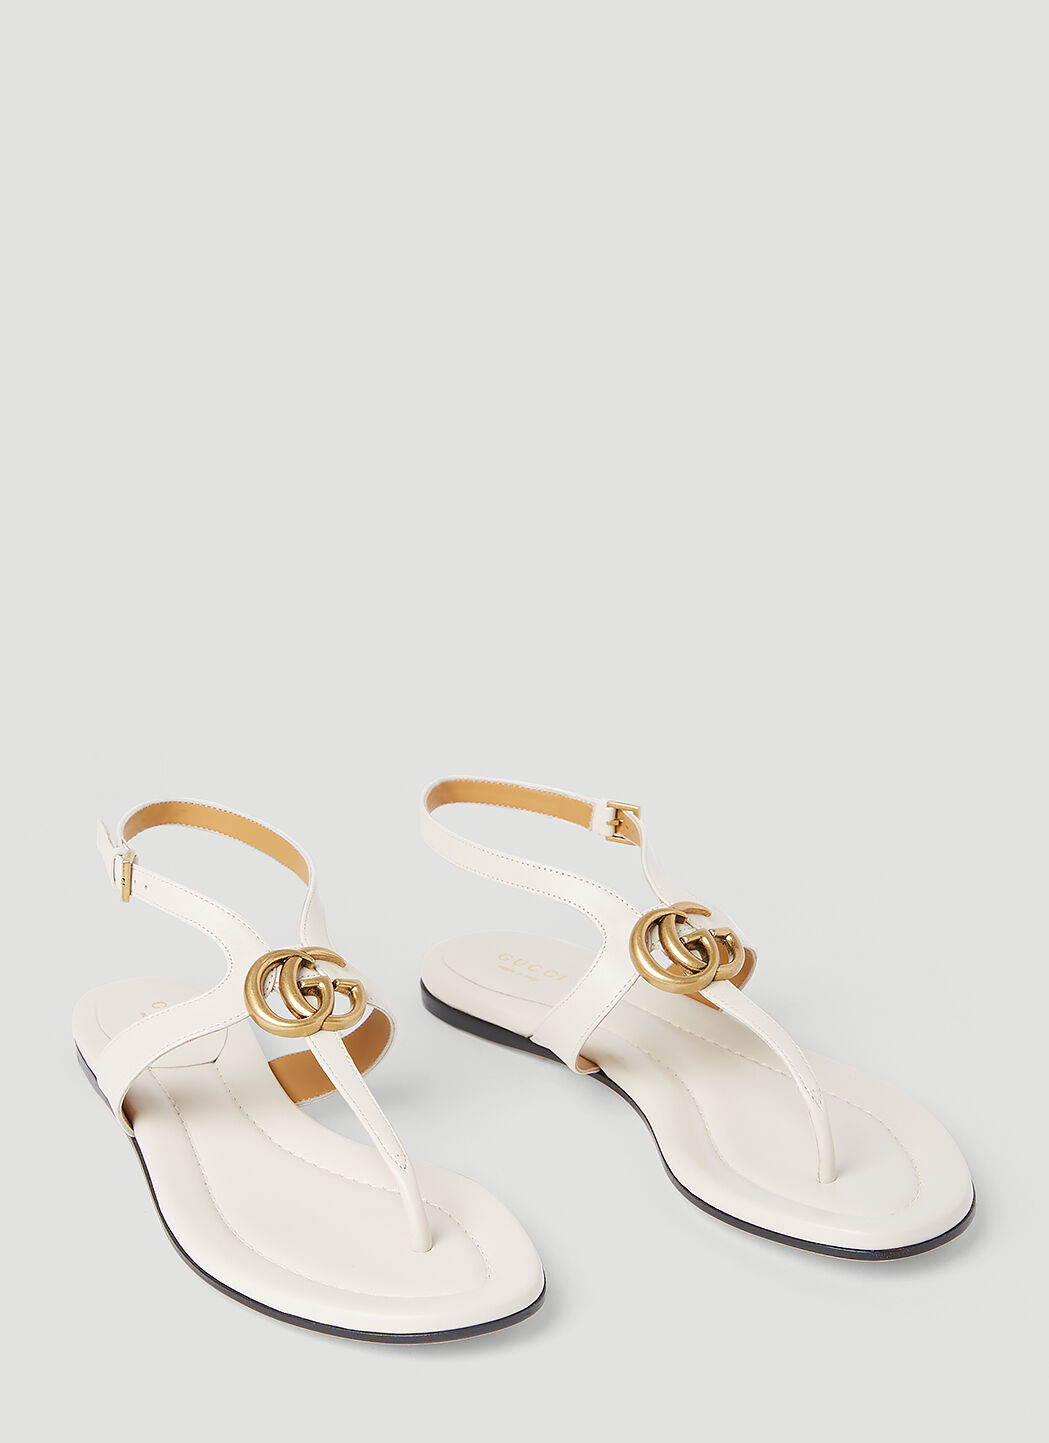 Gucci Women's Double G Thong Leather Sandals in White | LN-CC®